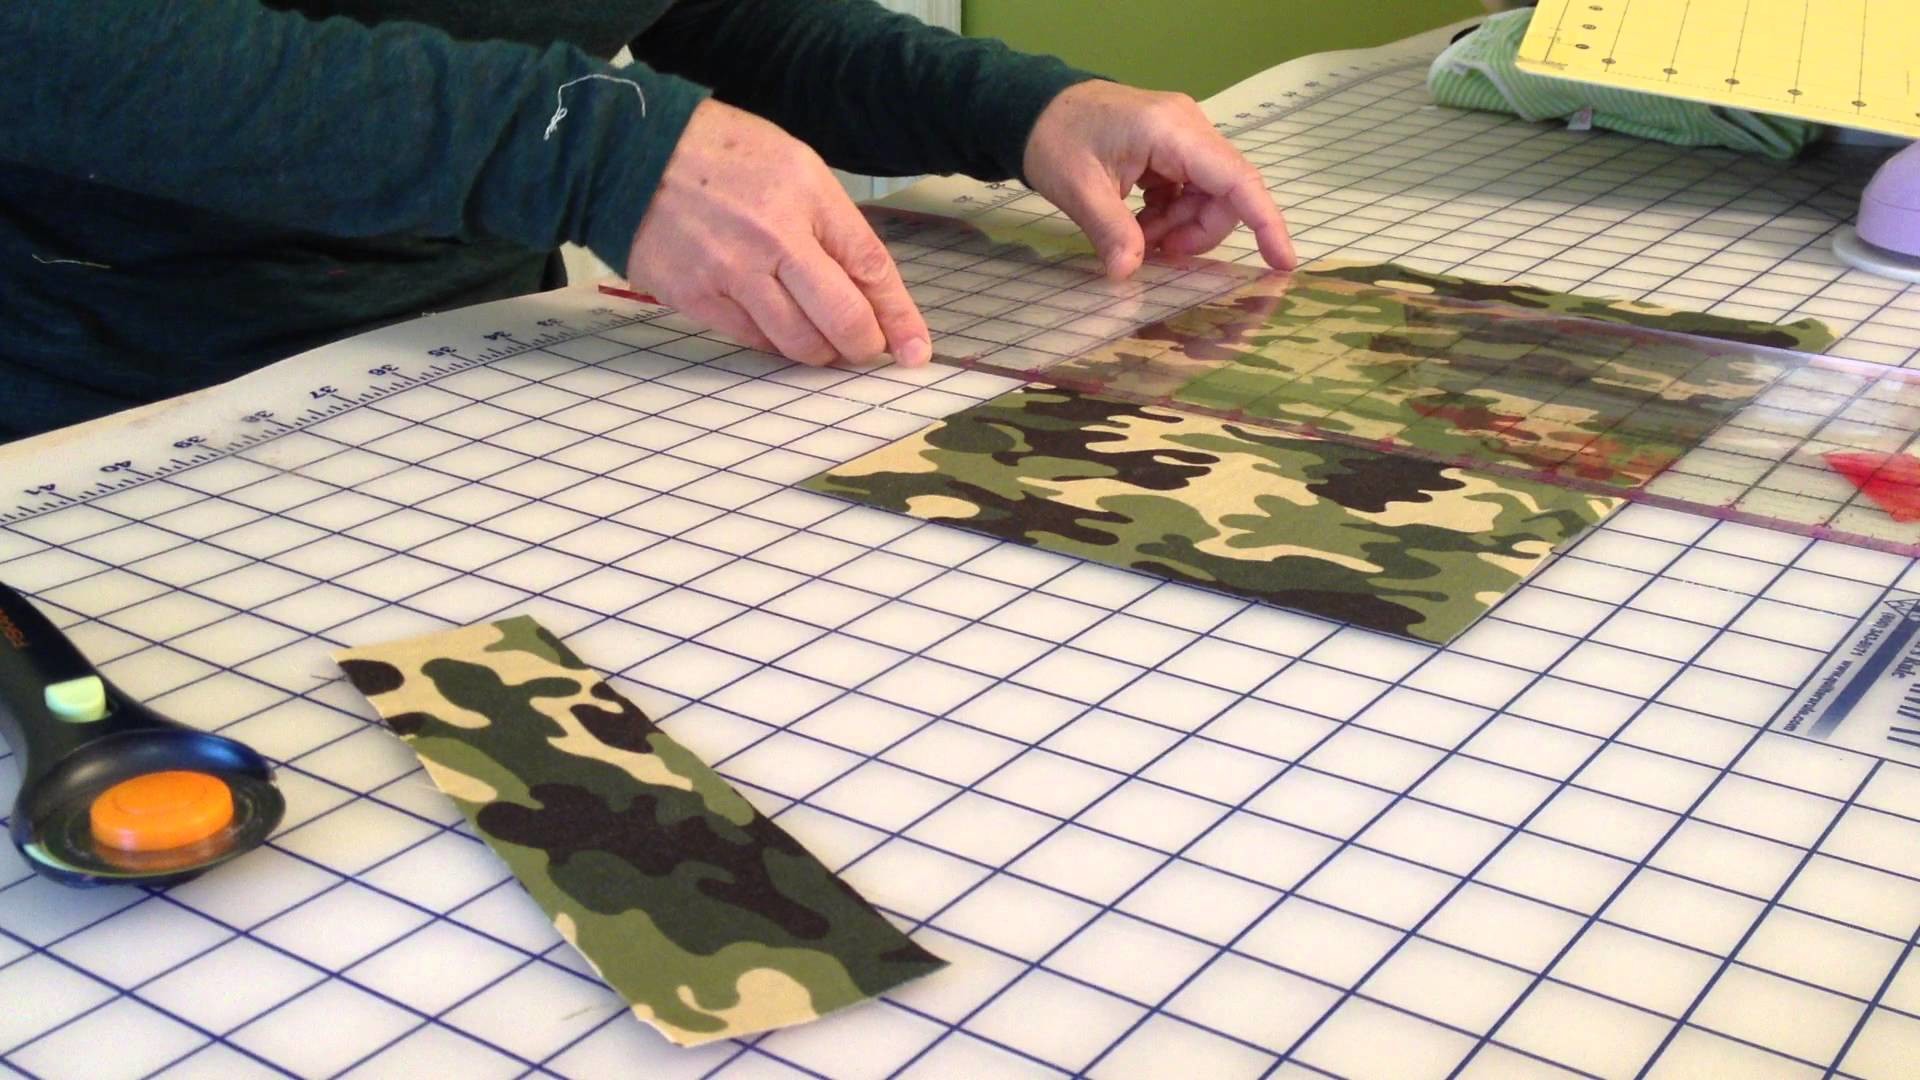 How To Use a Rotary Cutter and Cuttable Mat To Cut Fabric